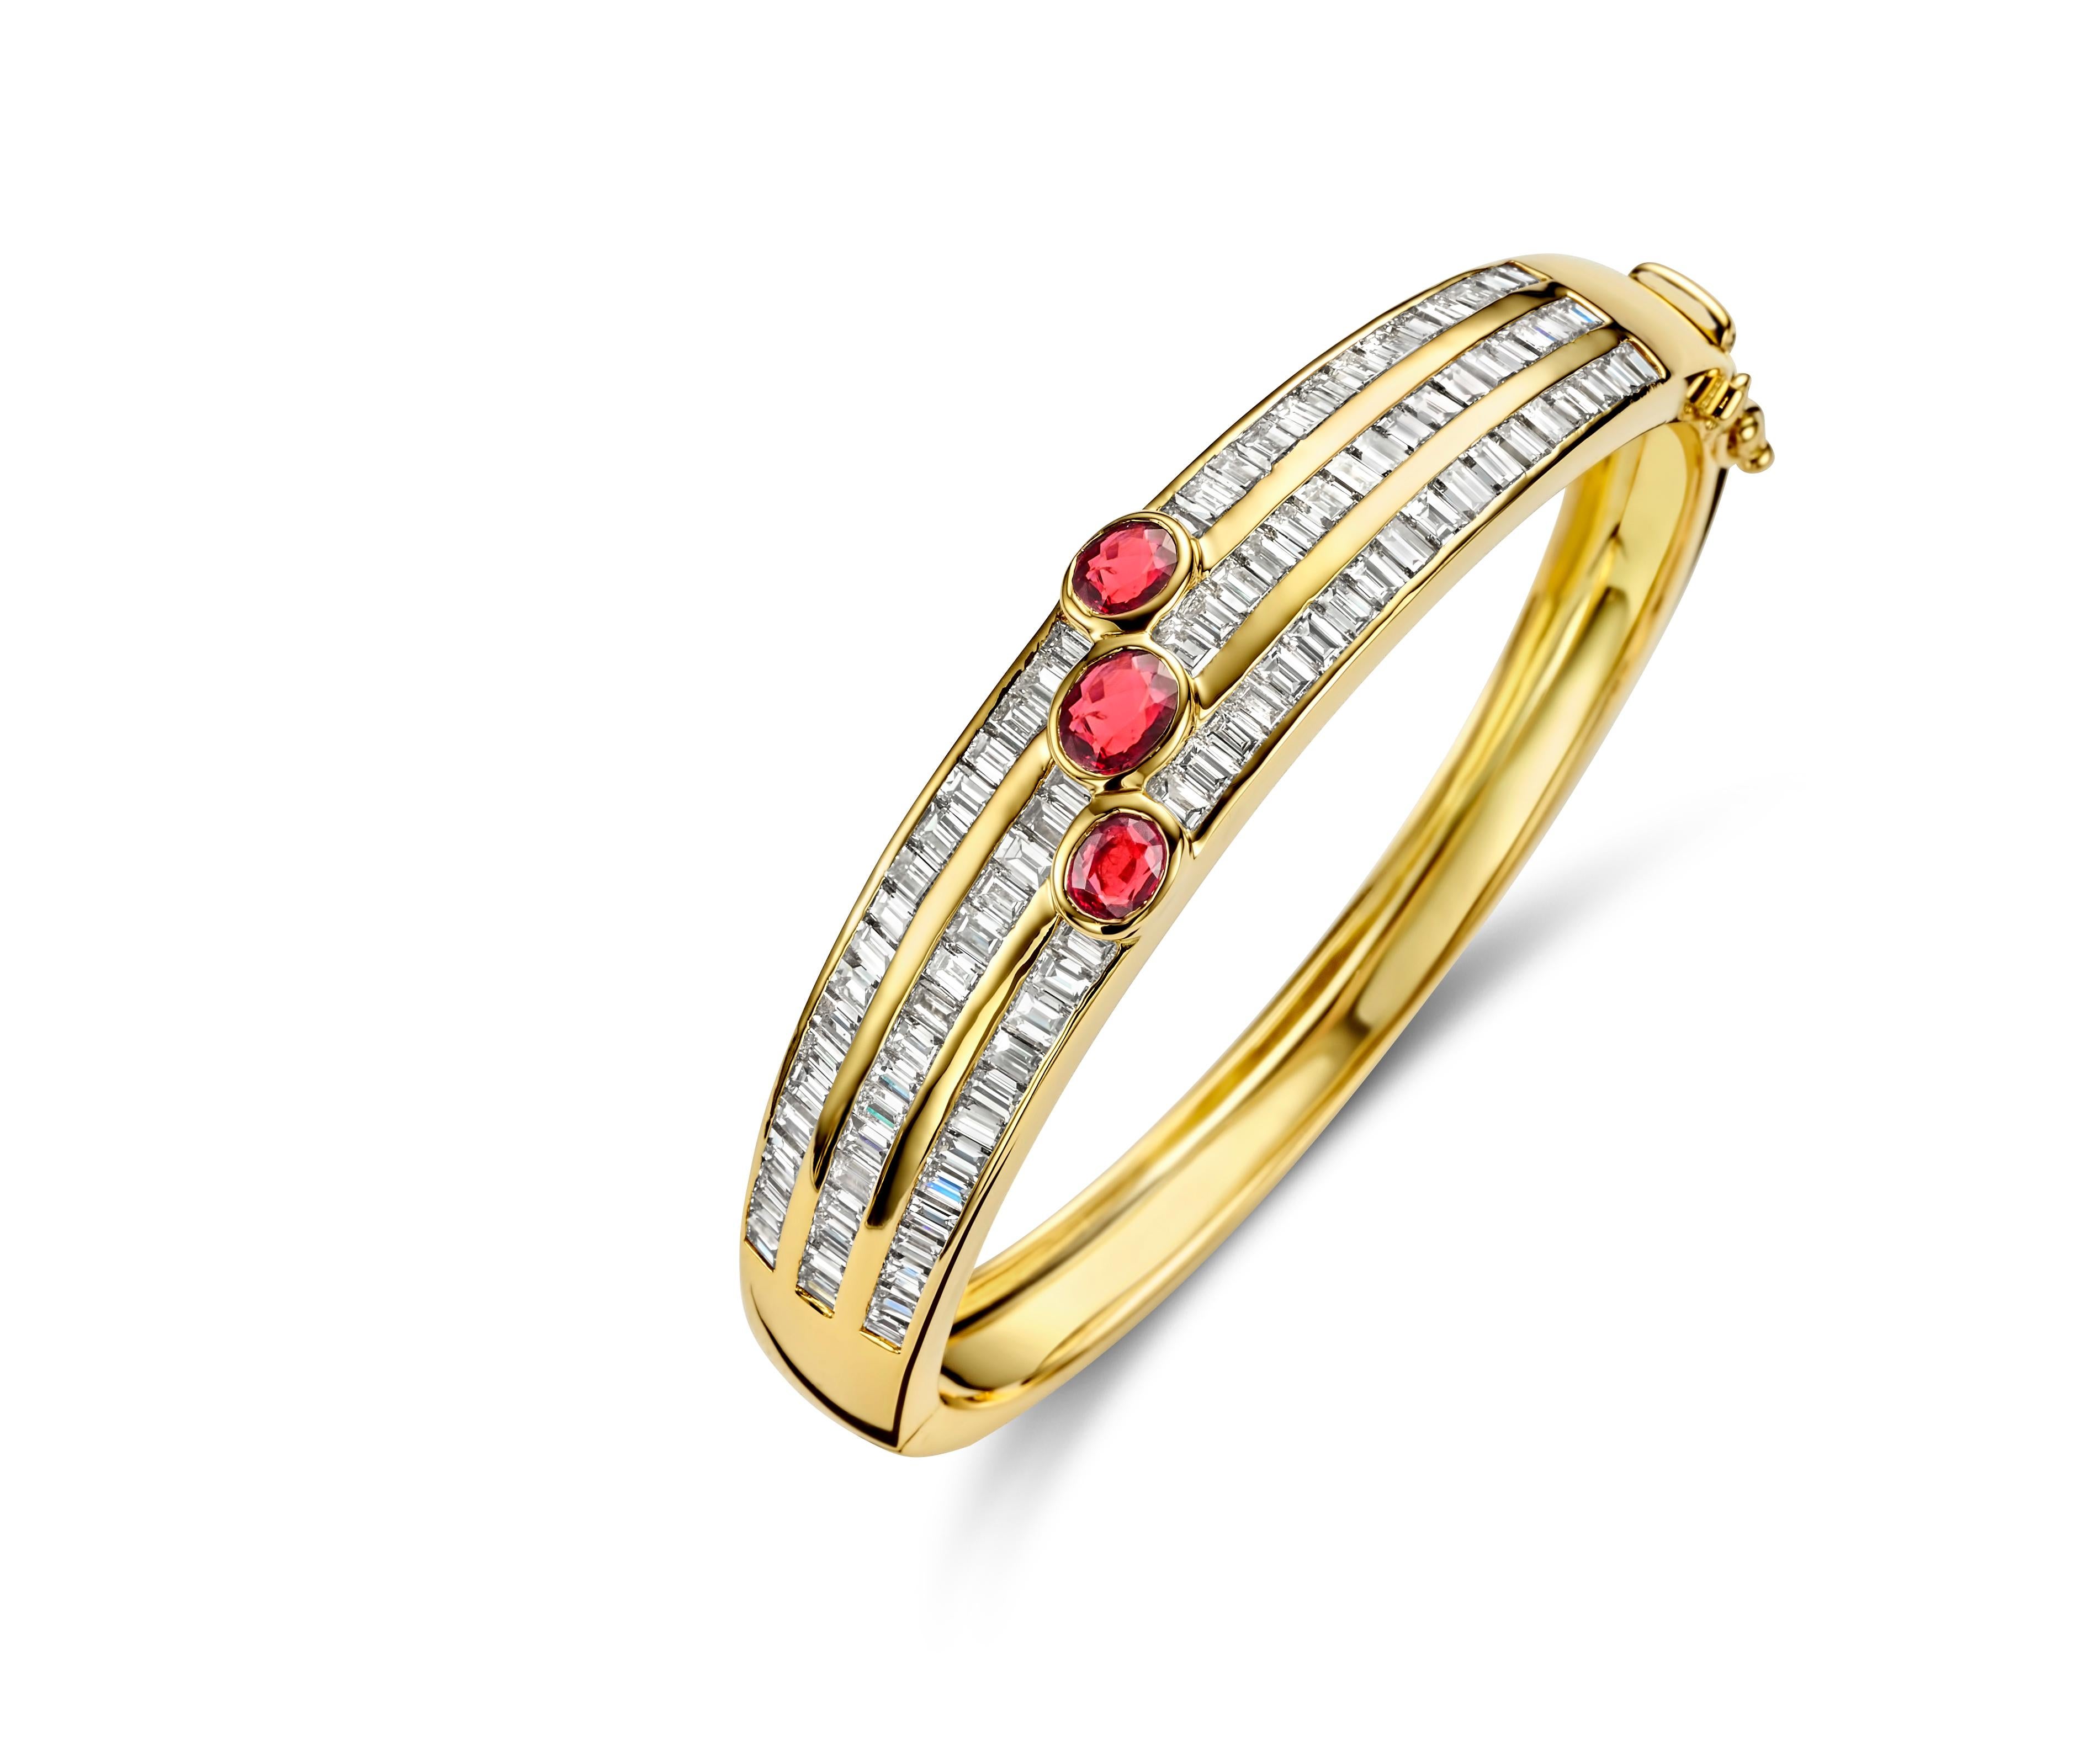 Beautiful Adler Genèva Set Of 18kt Matching Bracelet + Ring + Earrings, Total 11.48 Ct Diamonds

Ring
Diamonds: Baguette cut together approx. 2.52 ct.
Rubies: 3 oval cut rubies
Material: 18 kt. yellow gold
Ring size: 51 EU / 5.75 US ( Can be resized